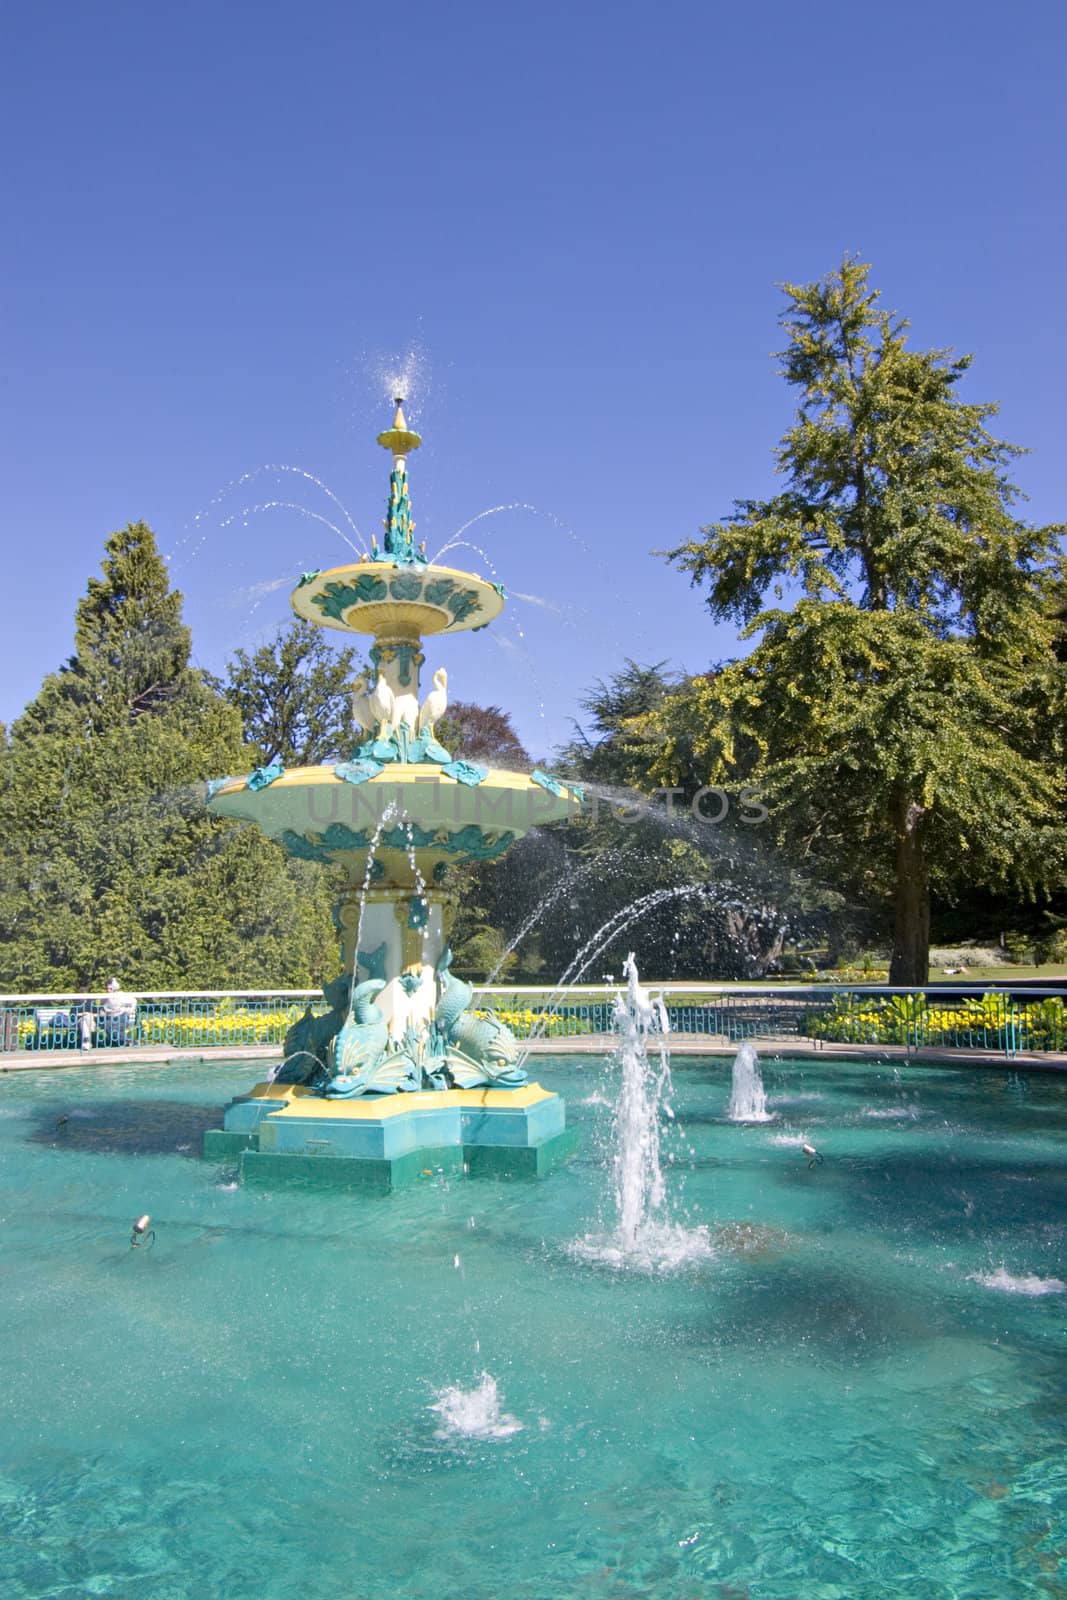 Peacock Fountain, Hagley Park, Christchurch, New Zealand by Travelling-light